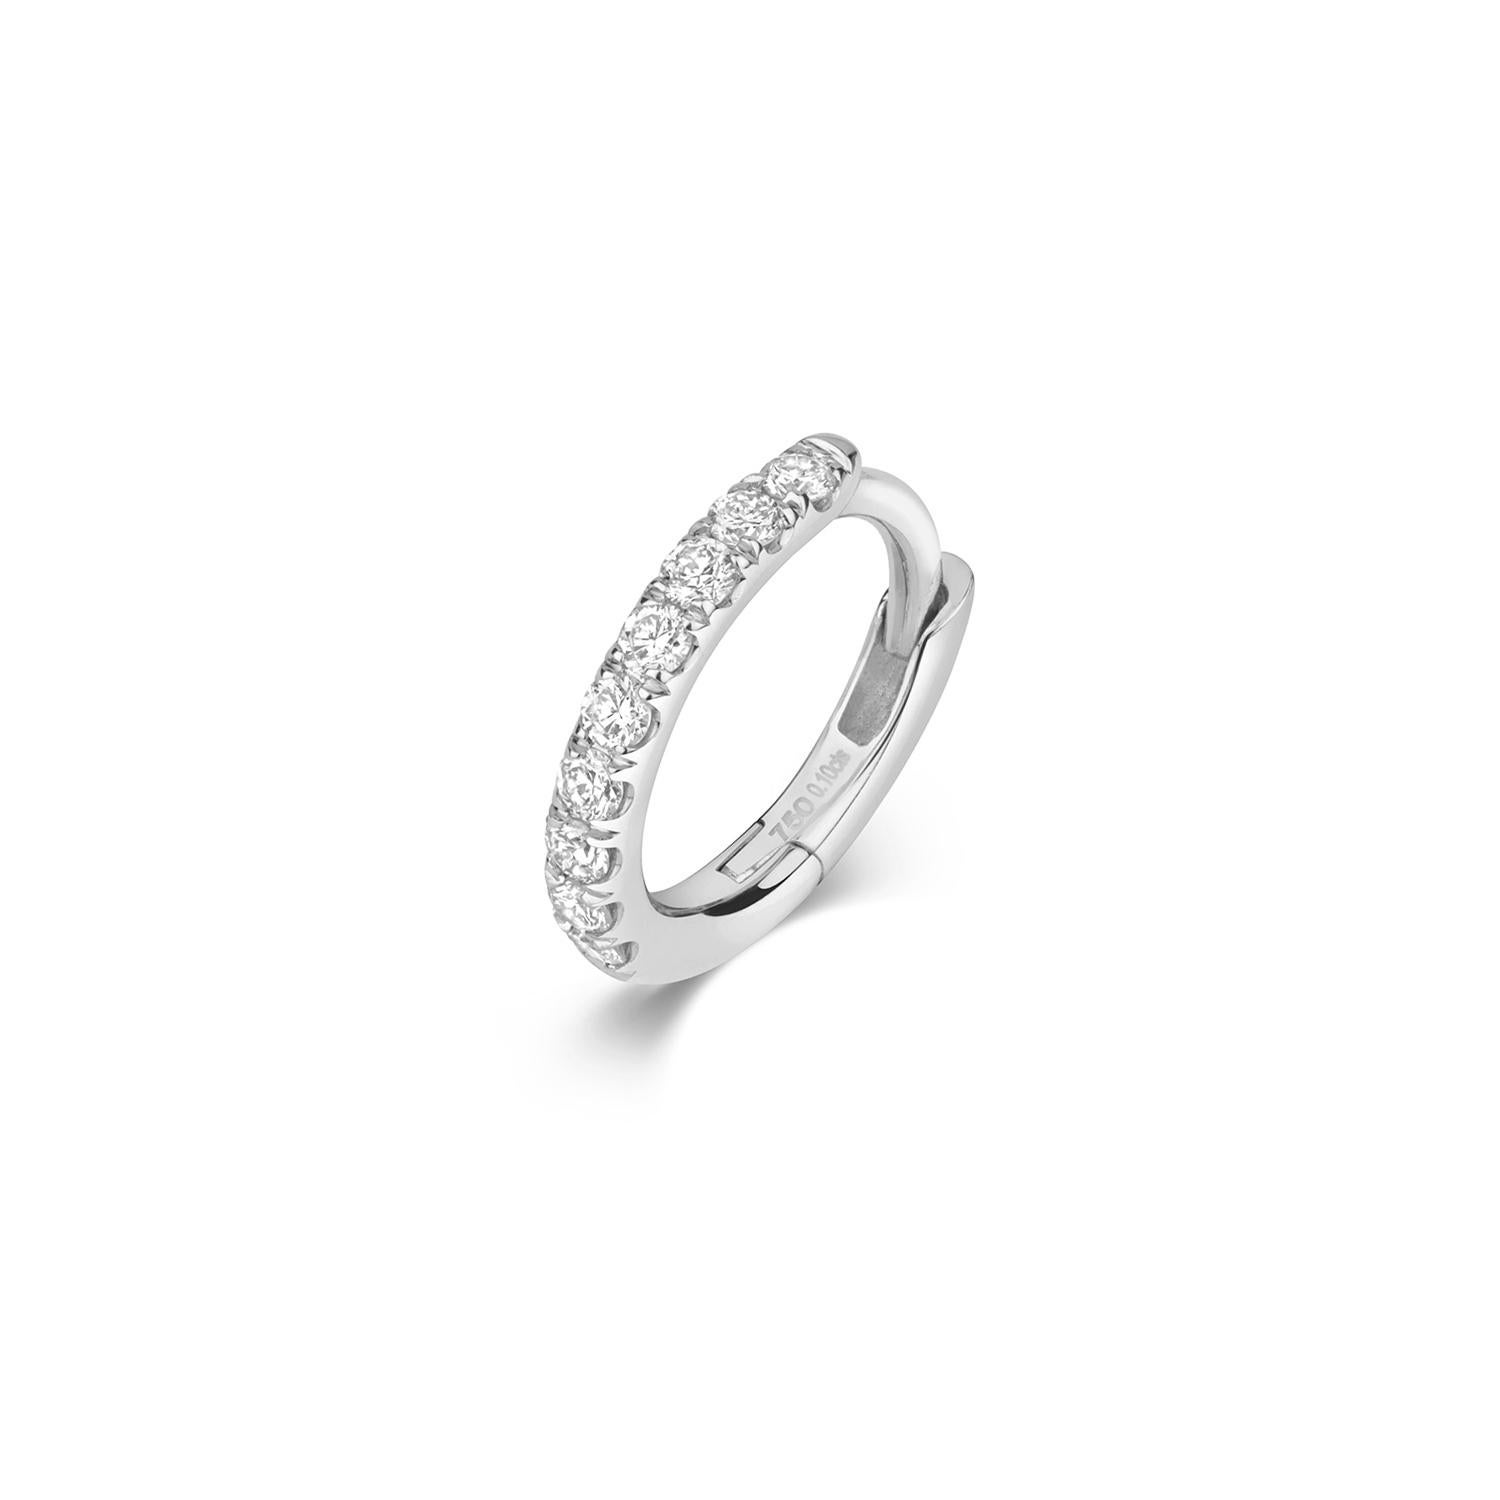 DIAMOND CARTILAGE HOOP

8mm

18CT

0.10CT

G

SI

Weight: 0.68g